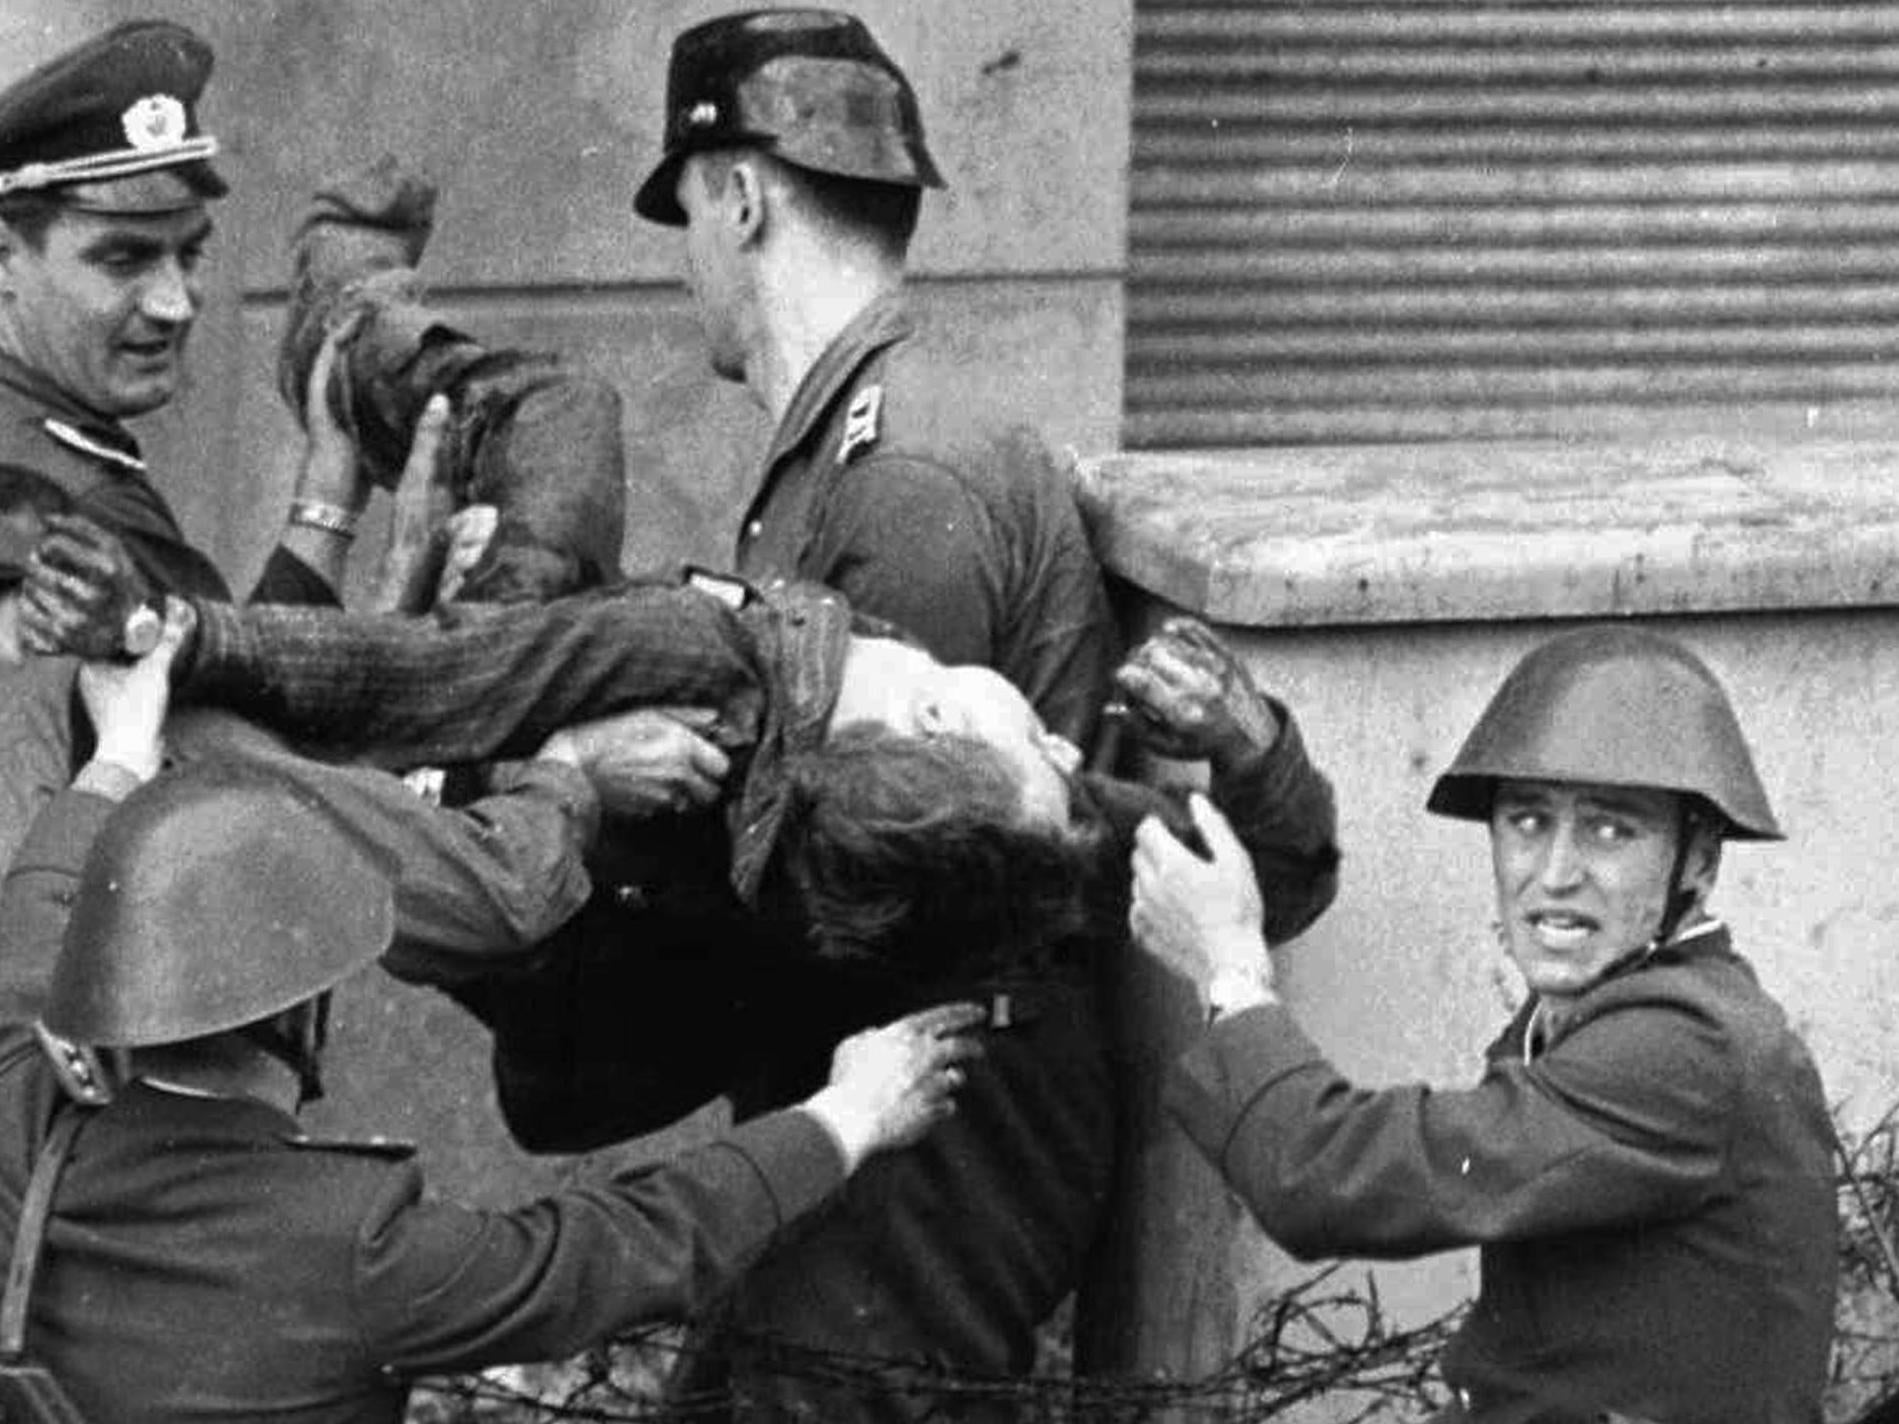 A bloodied and dying Fechter is carried away by the East German guards who shot him down as he tried to flee to the west